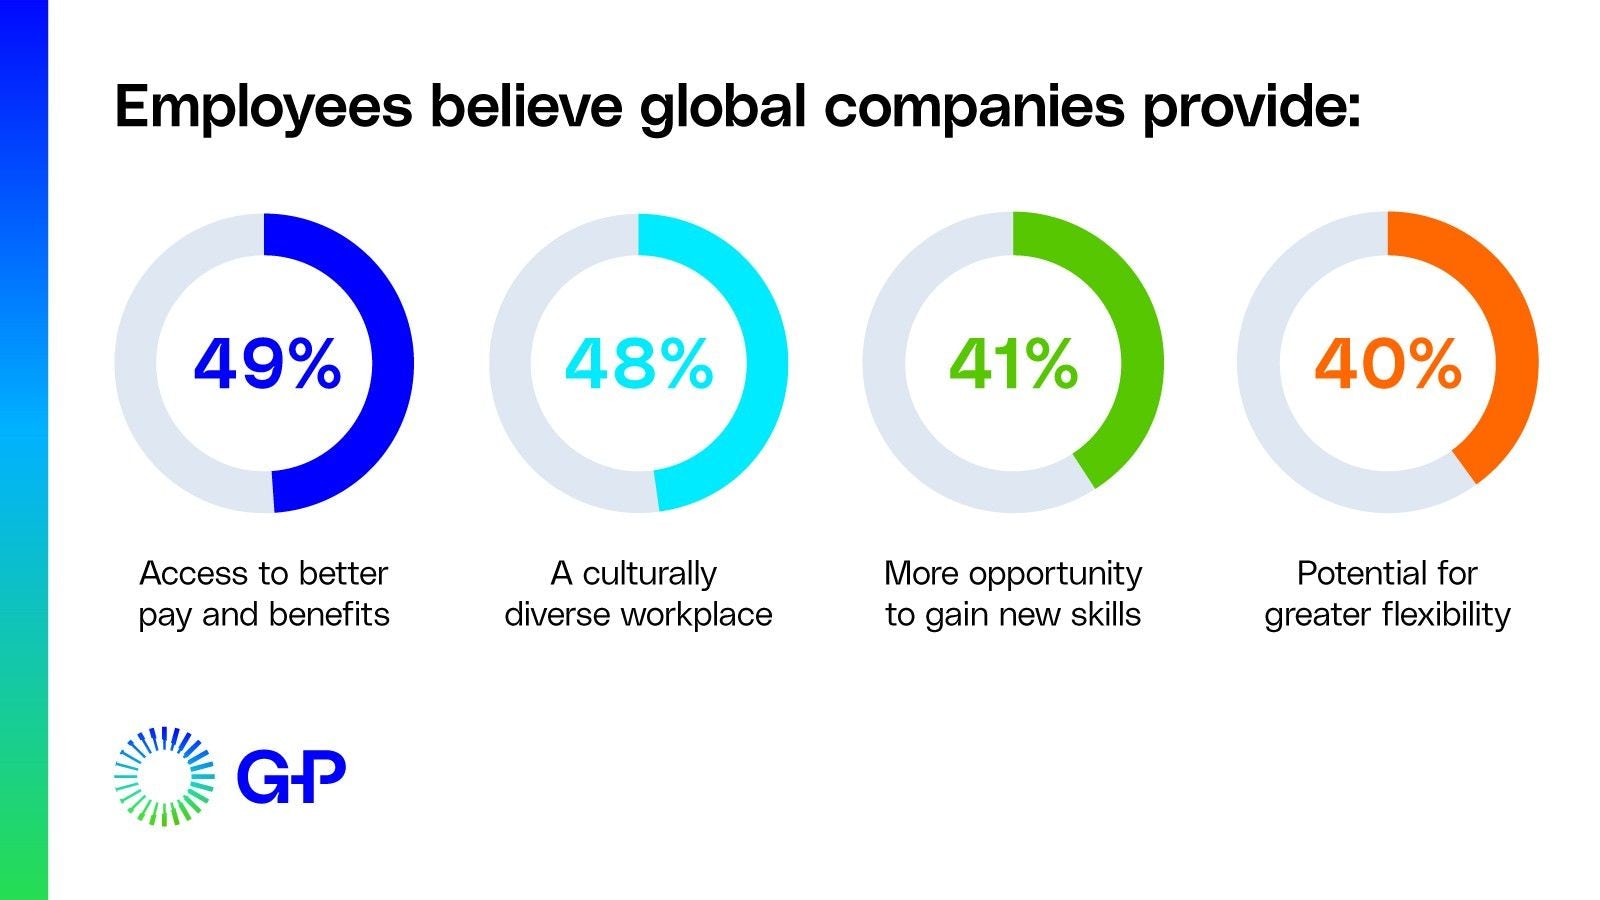 Infographic with 4 benefits of globalization and working for a global company